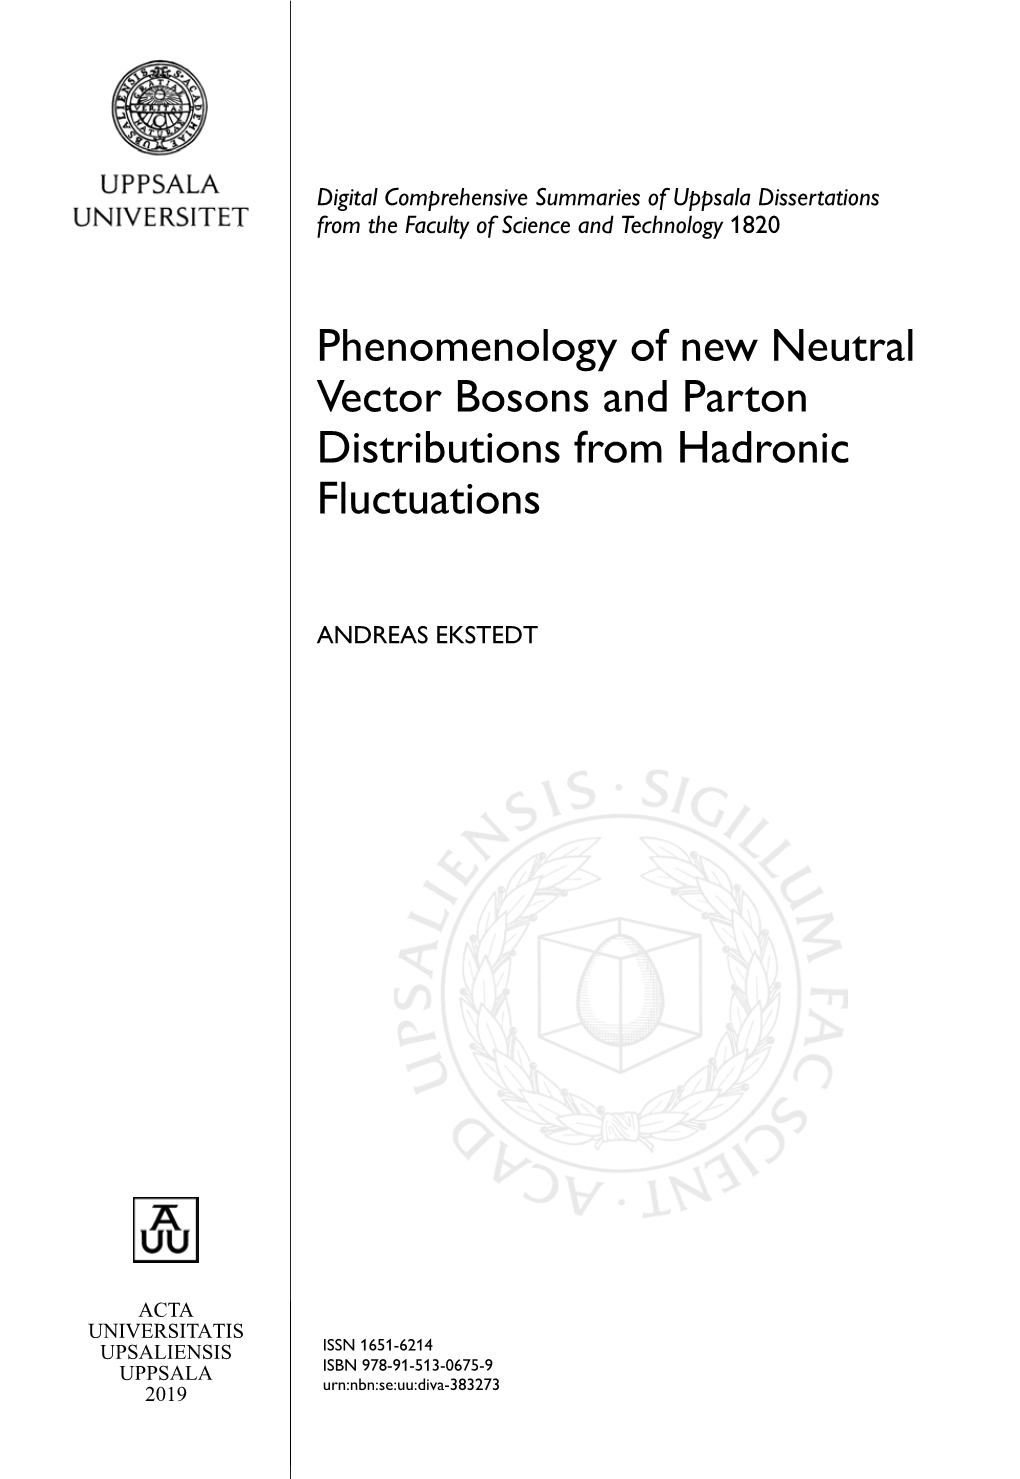 Phenomenology of New Neutral Vector Bosons and Parton Distributions from Hadronic Fluctuations